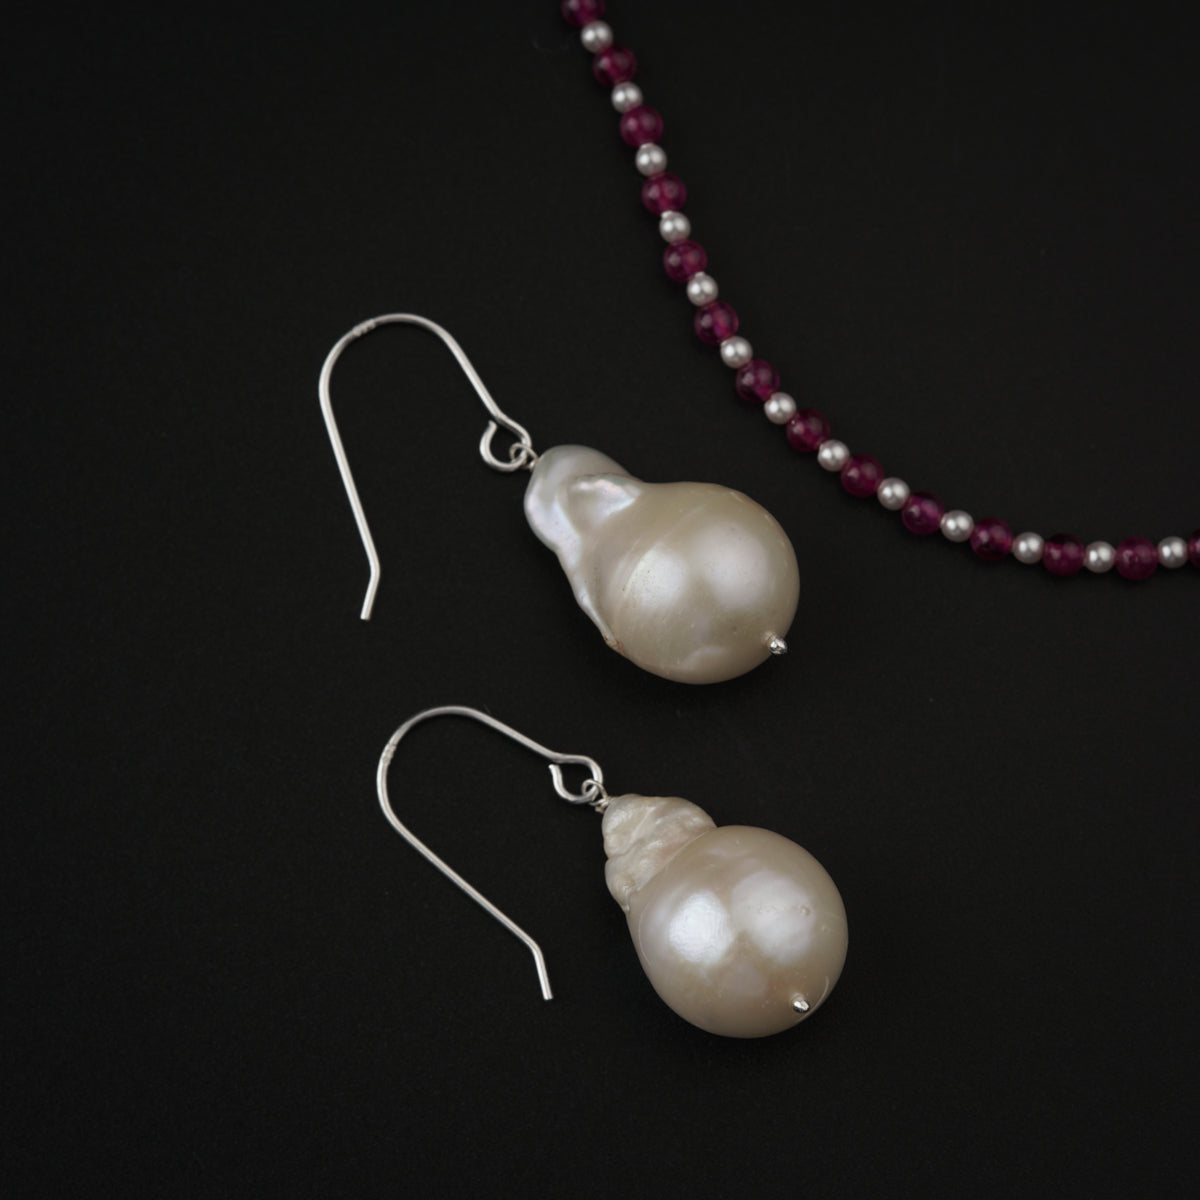 Handmade Ruby and Pearls Set